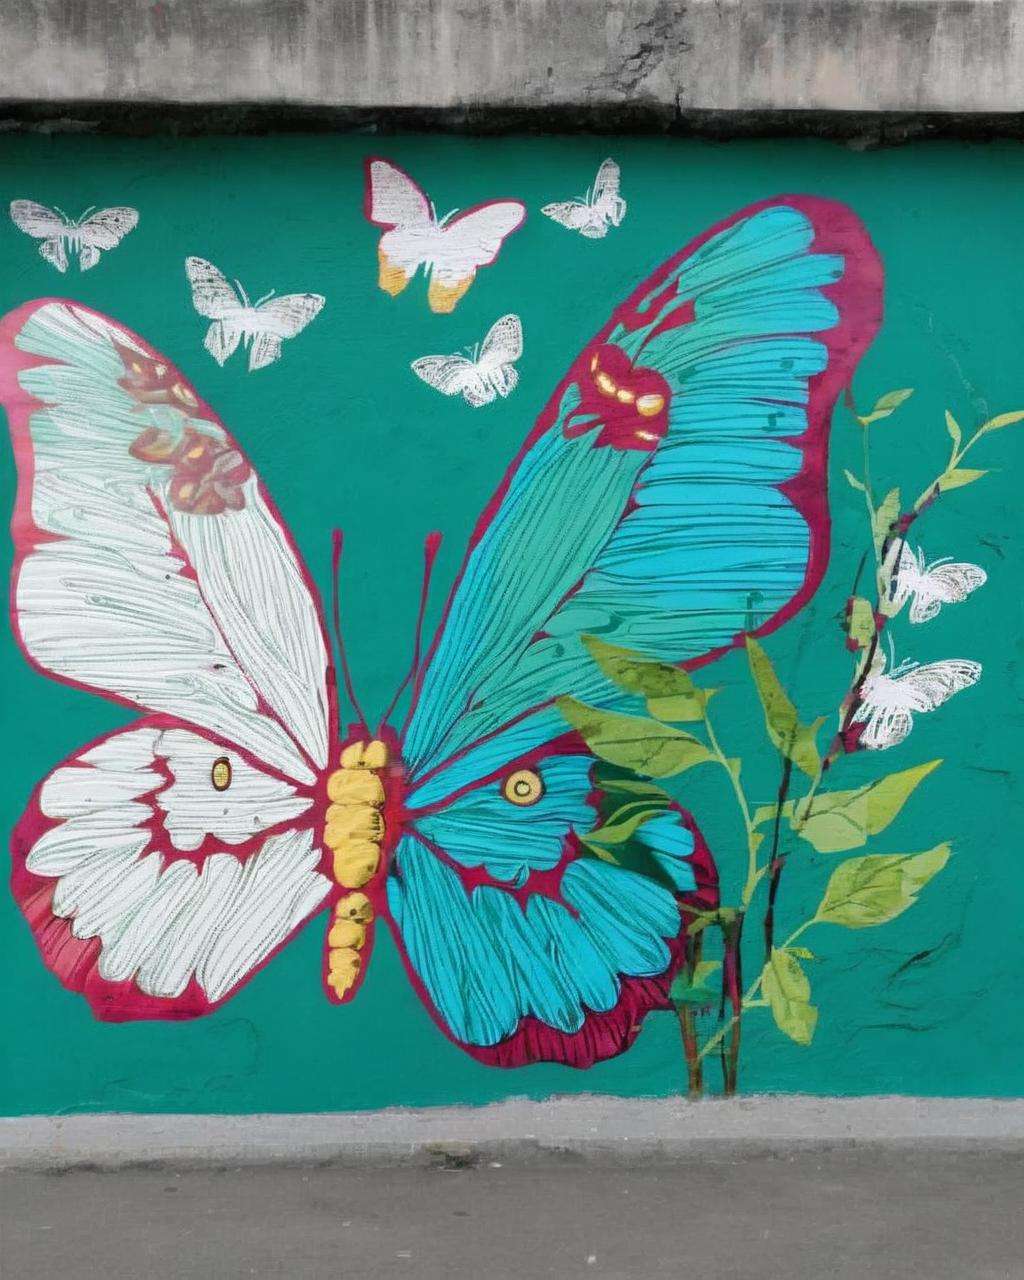 Street art with a message of environmental awareness:0.6, featuring a delicate butterfly:0.4 with wings composed of intricate flora and fauna:0.4, highlighting the beauty and fragility of nature:0.3.<lora:Street_Art:1.0>